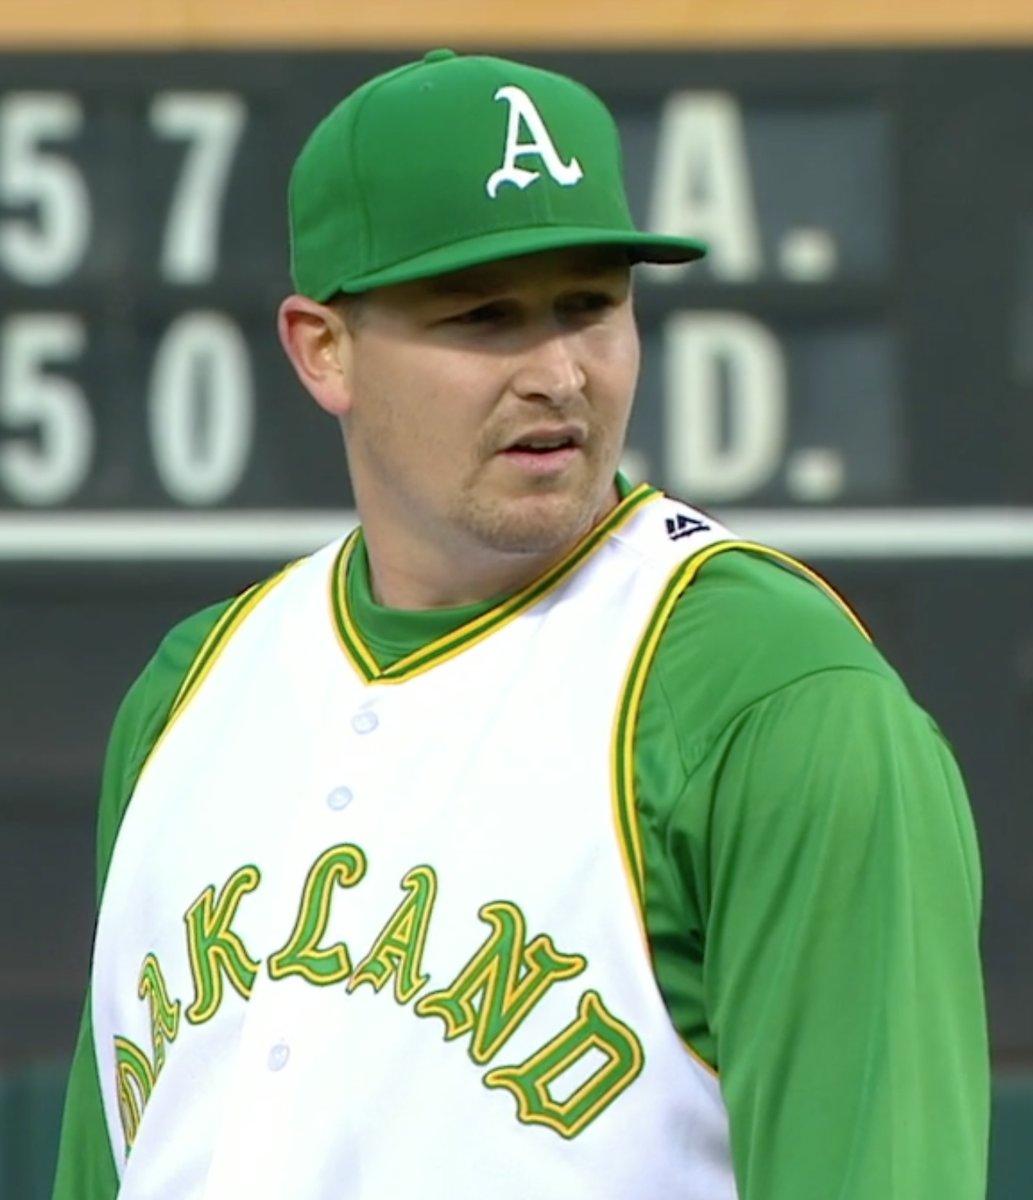 A's and White Sox Wear 1968 Throwback Uniforms